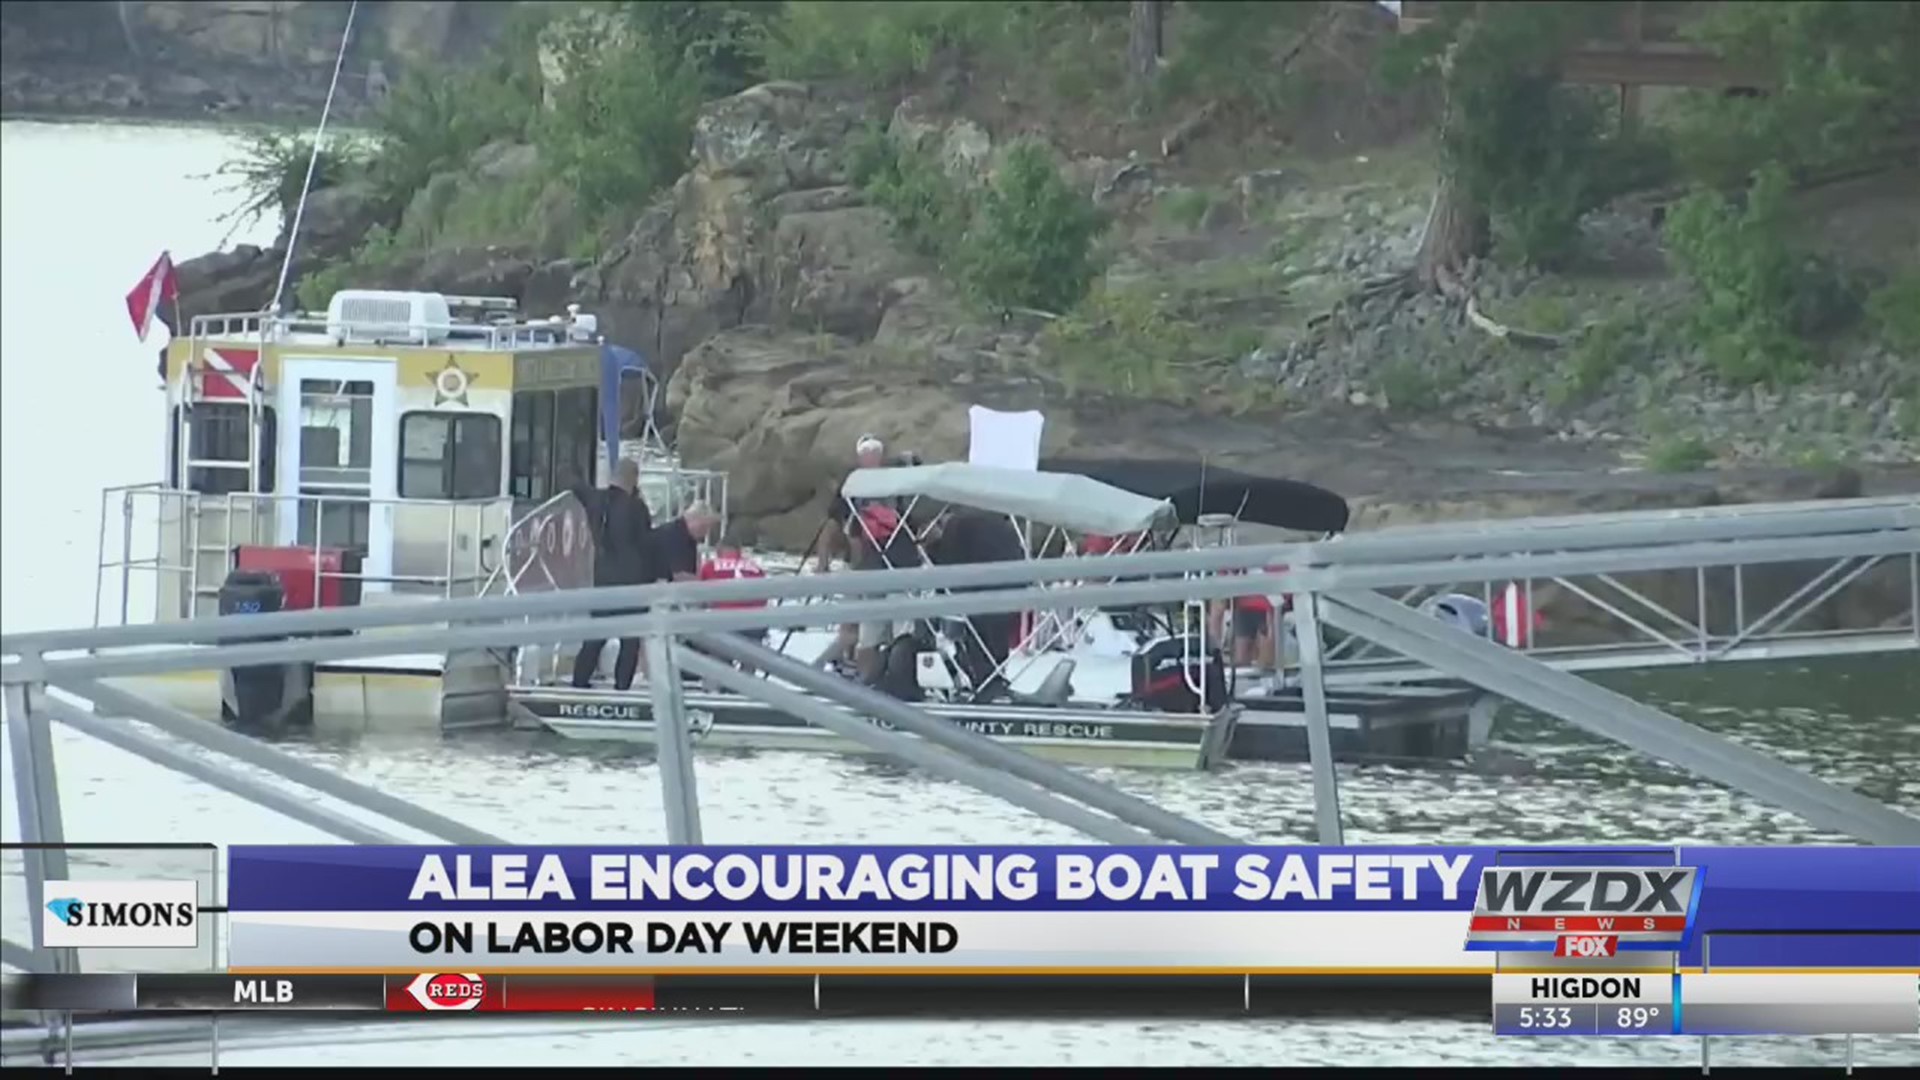 "Safety First" is the message for boaters this holiday weekend.